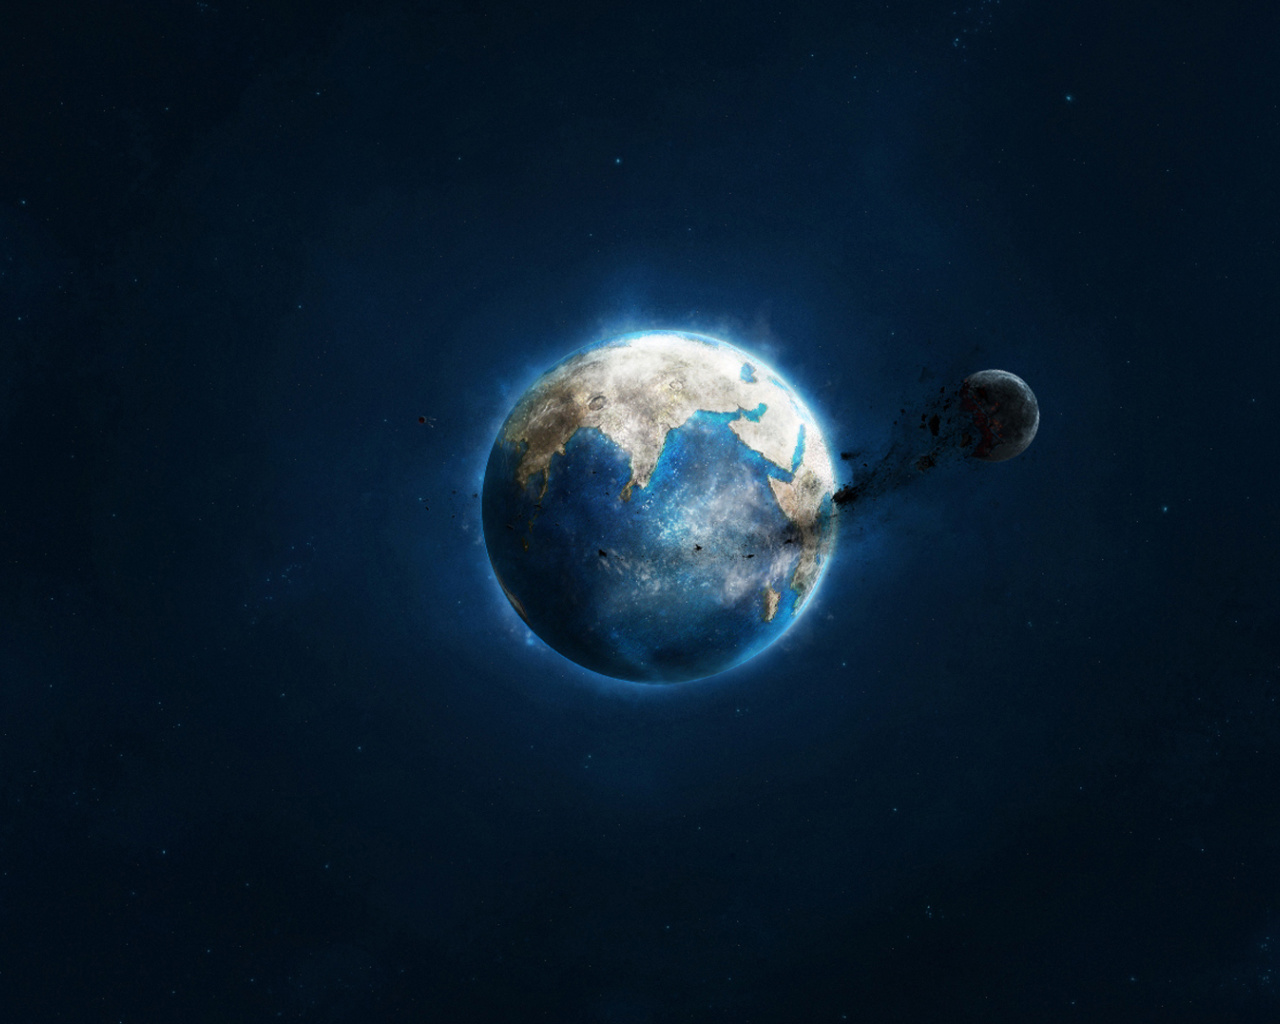 Das Planet and Asteroid Wallpaper 1280x1024